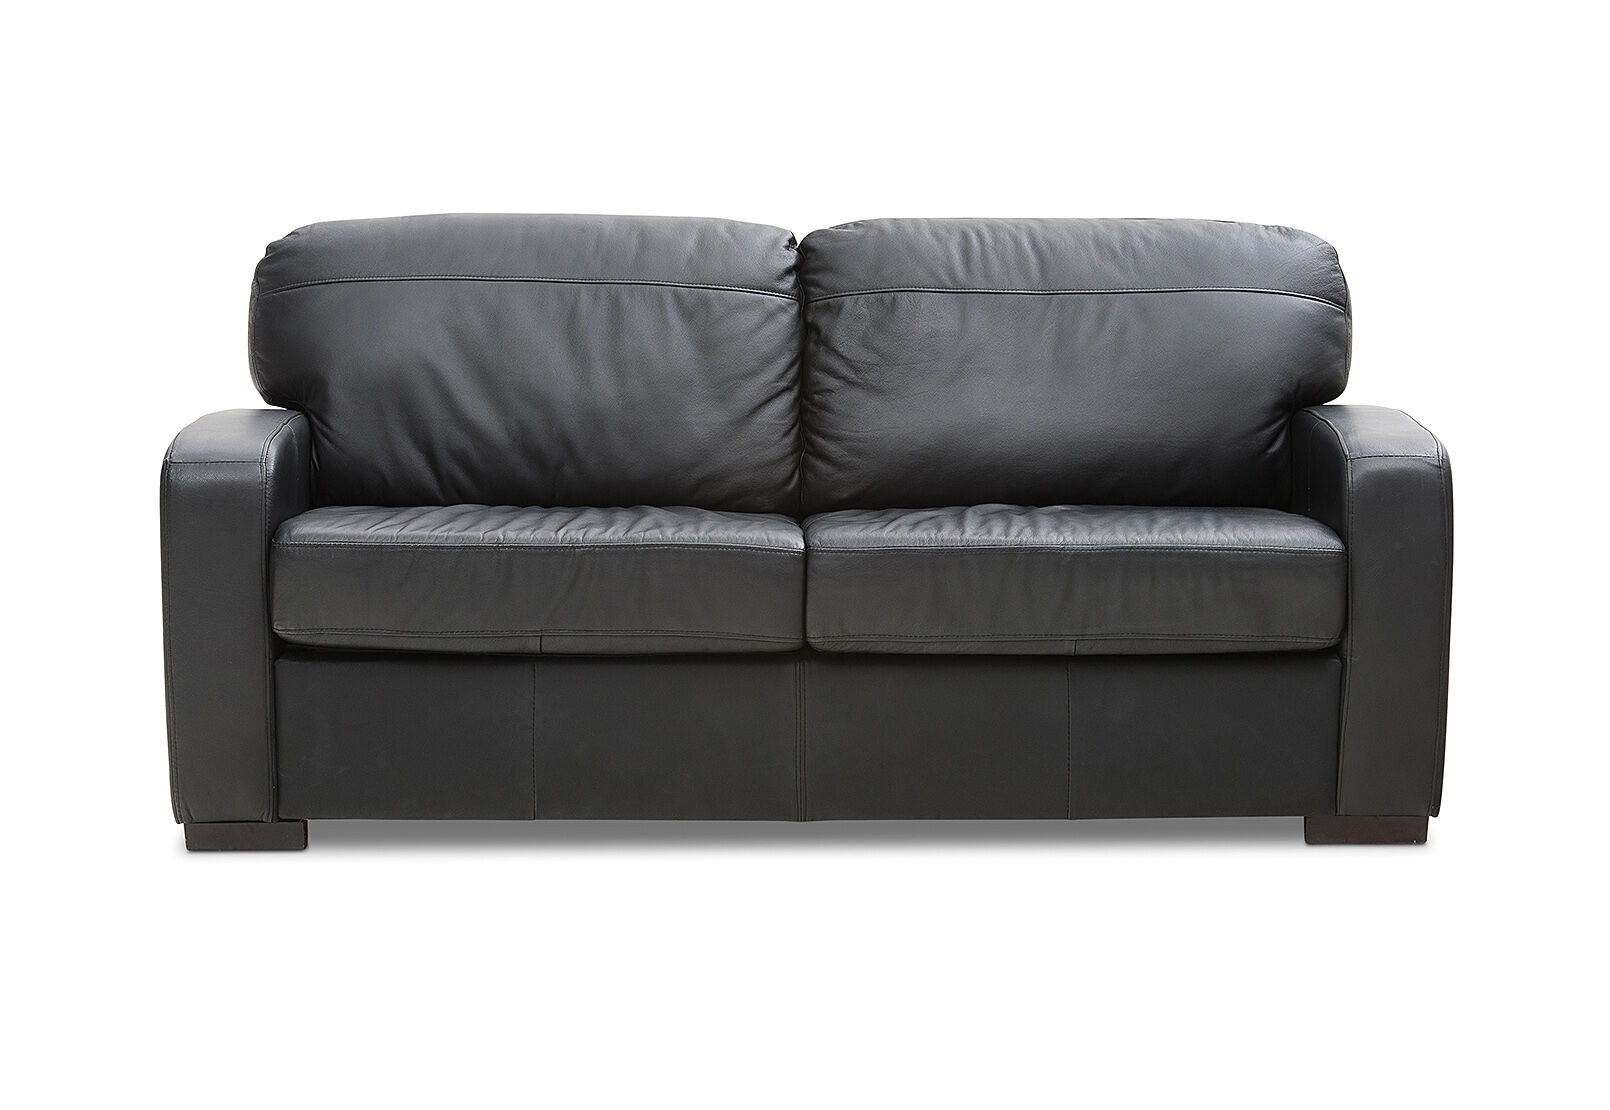 Black Future Leather 2 Seater Sofa Bed, Black 2 Seater Leather Sofa Bed